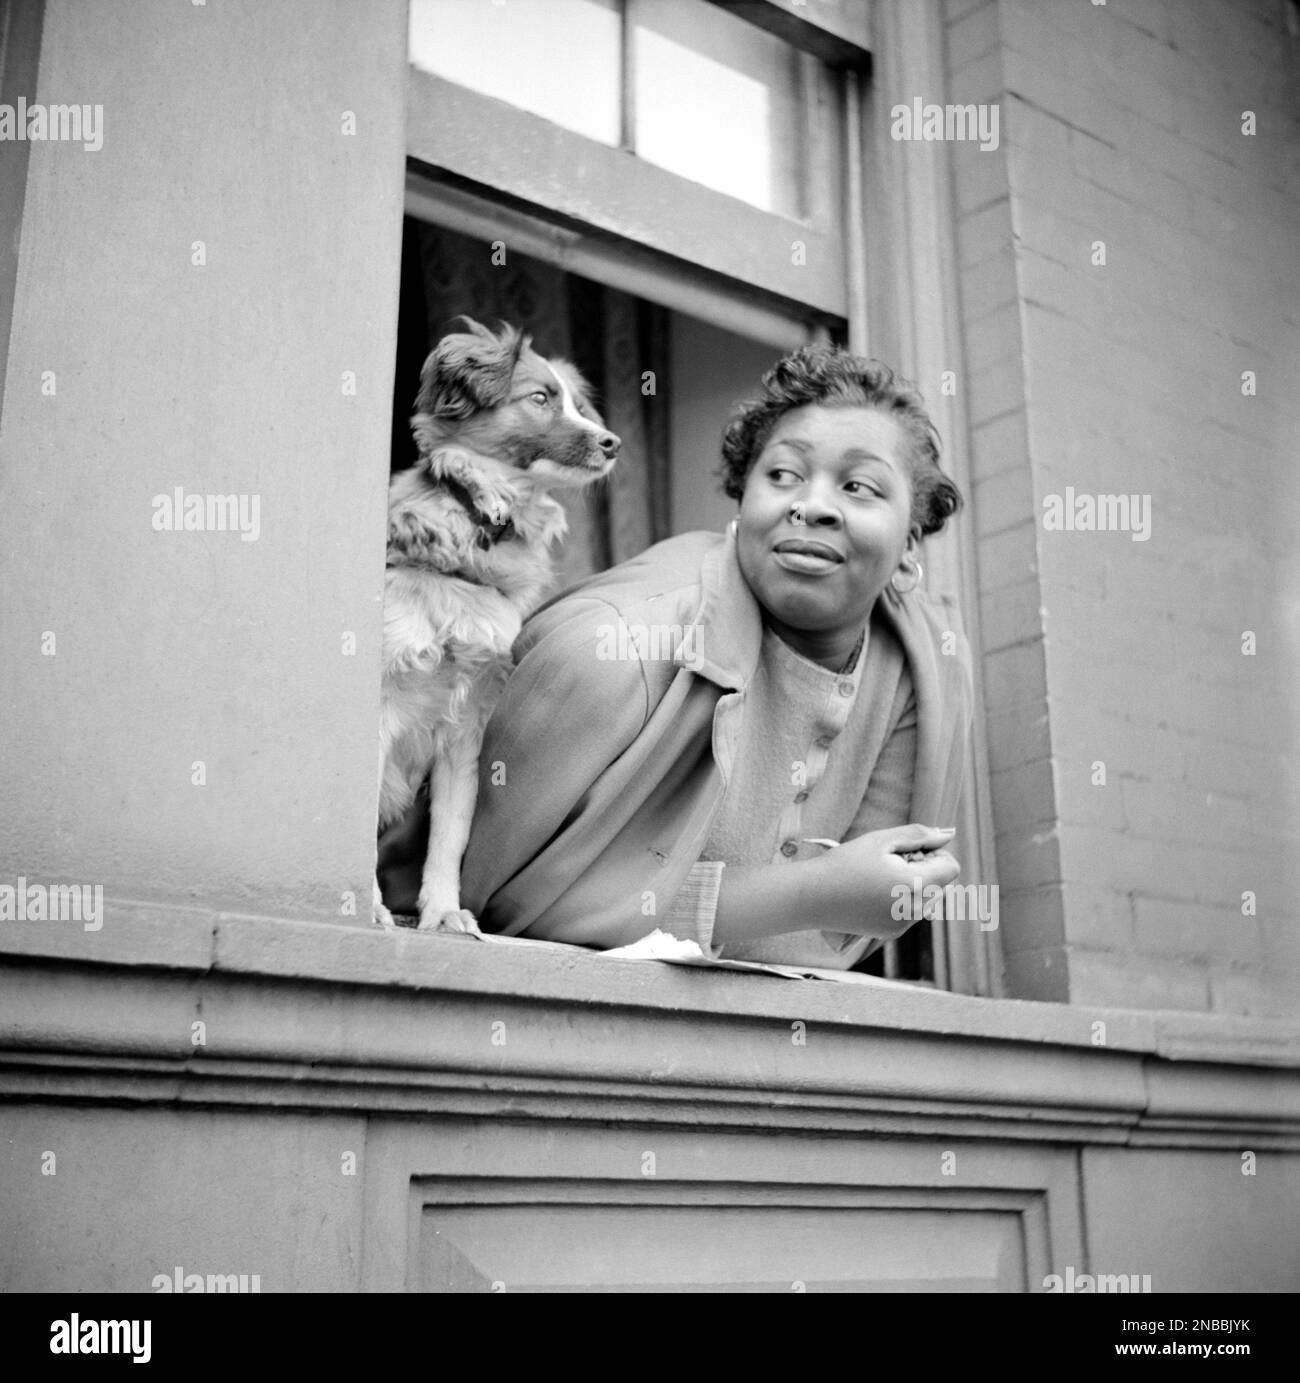 1944 , NEW YORK , NY , USA :  An Afro American woman and her dog at window in the Harlem section . Photo by celebrated American  reporter photographer GORDON PARKS ( 1912 - 2006 ) at work for the U.S. Farm Security Administration , Office of War Information . Overseas Picture Division. Washington Division . - HISTORY - FOTO STORICHE - ANNI QUARANTA  - 40's - '40 - STORIA DELLA FOTOGRAFIA - HISTORY OF PHOTOGRAPH - smile - sorriso - DONNA ALA FINESTRA - di COLORE - CANE - DOG - Pet animal - STREET PHOTOGRAPHY - afroamericana - Afroamericani - African Americans  - Black Americans - Afro-Americans Stock Photo